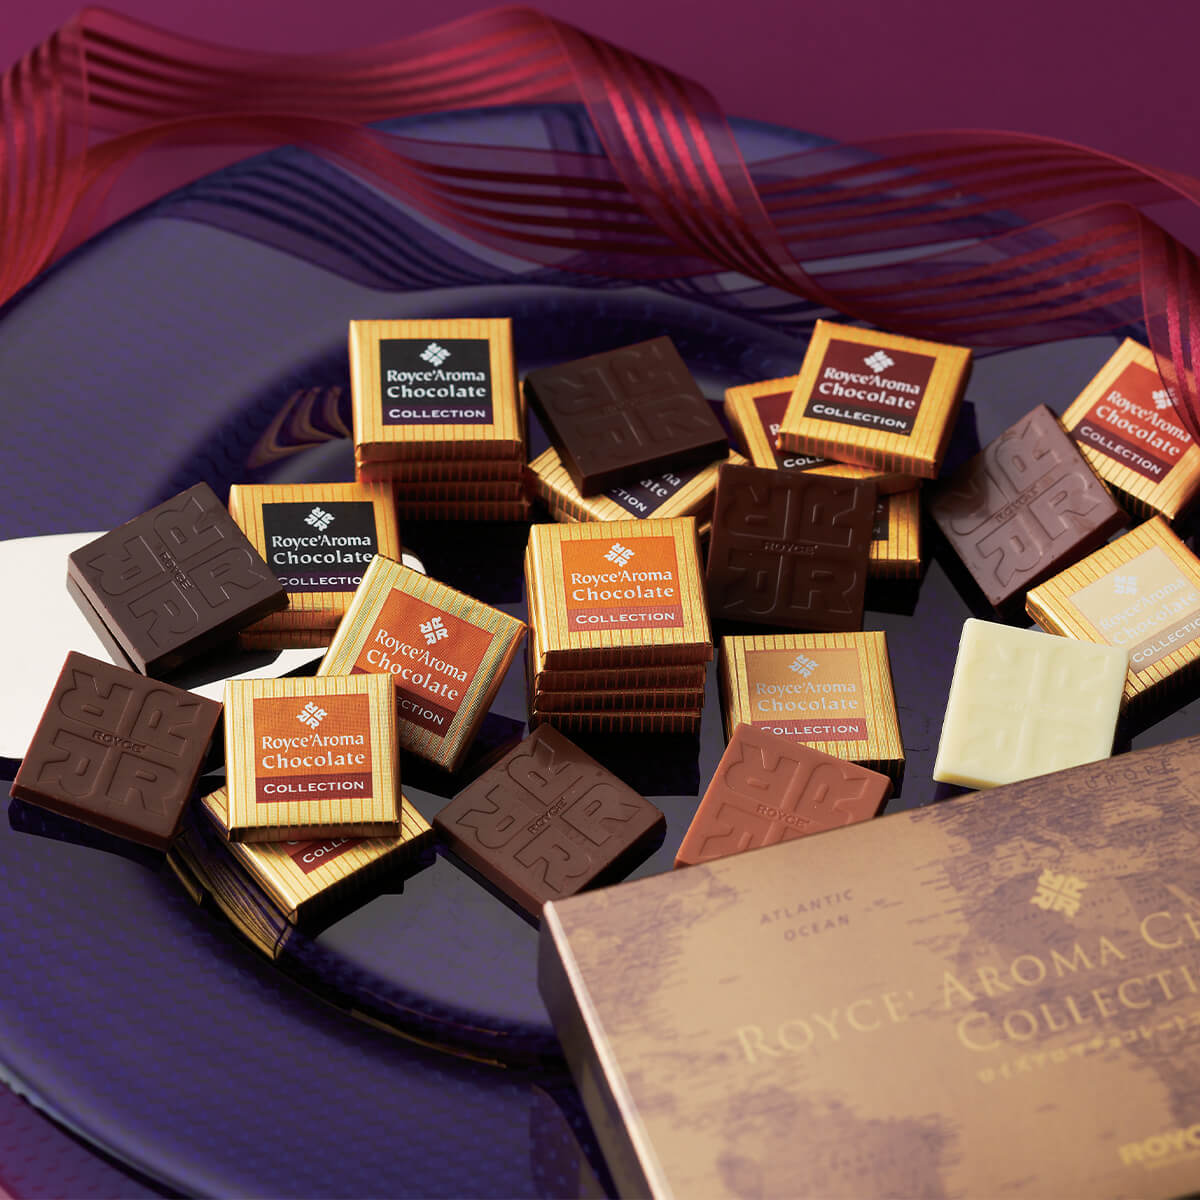 ROYCE' Chocolate - Image shows chocolate squares both wrapped and unwrapped on a blue plate. Accents include a red ribbon and a brown box.